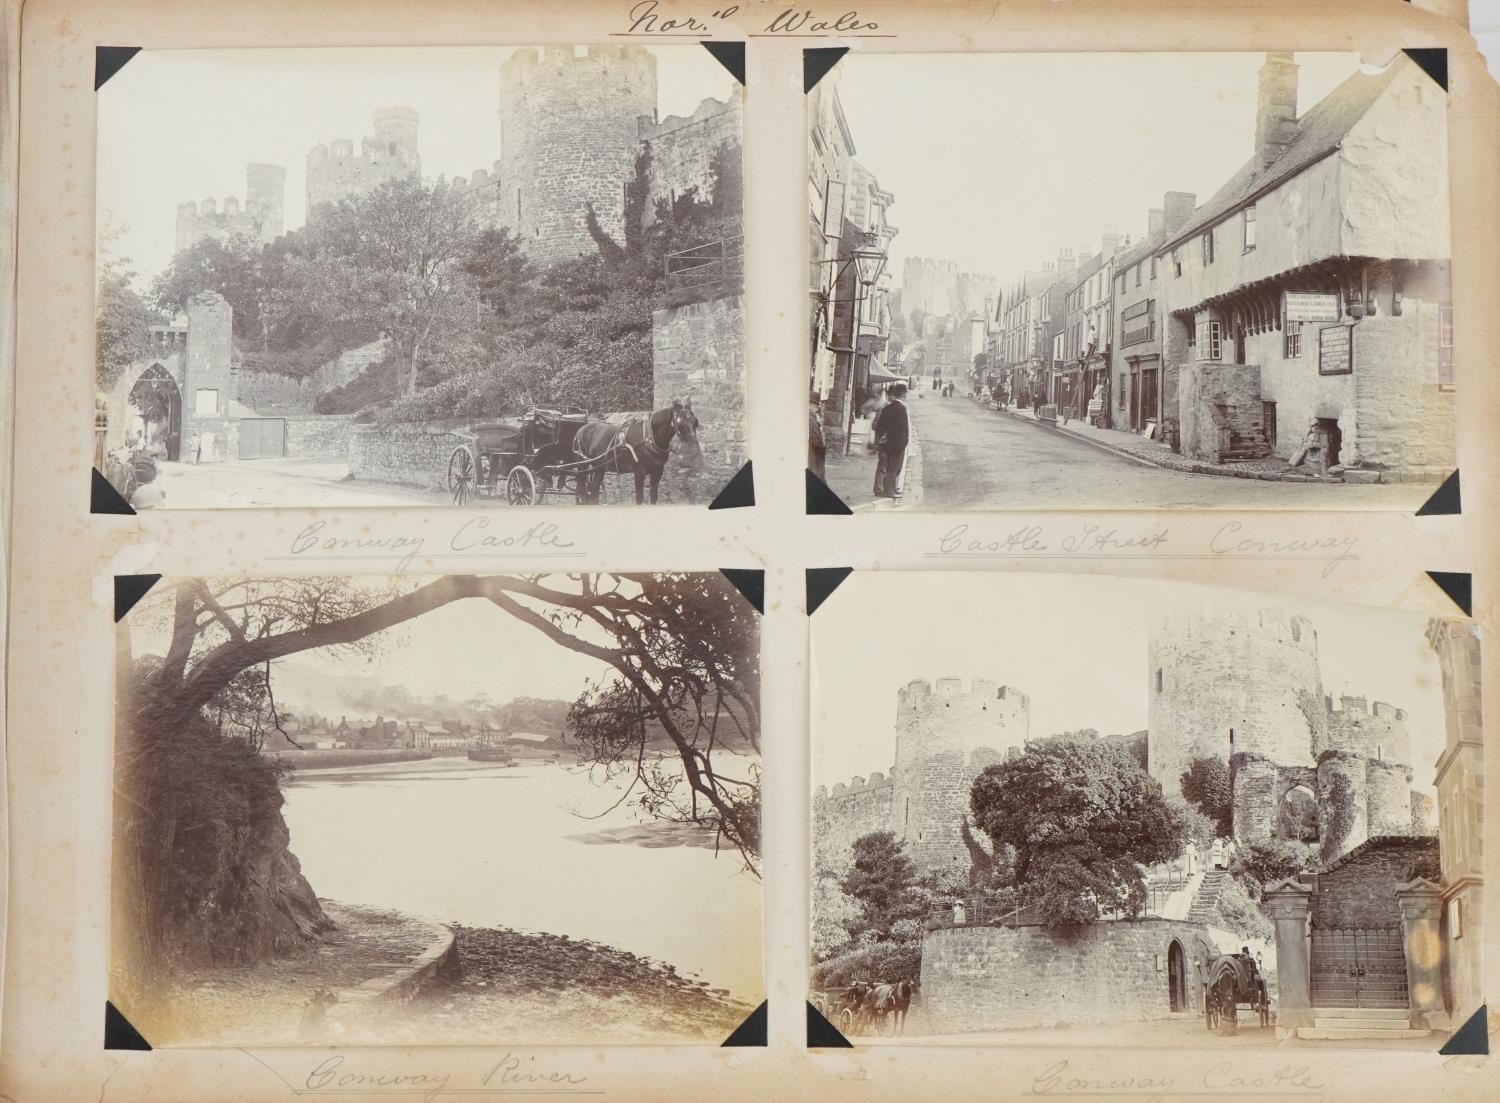 Early 20th century black and white photographs arranged in an album including Staffordshire, - Image 25 of 40